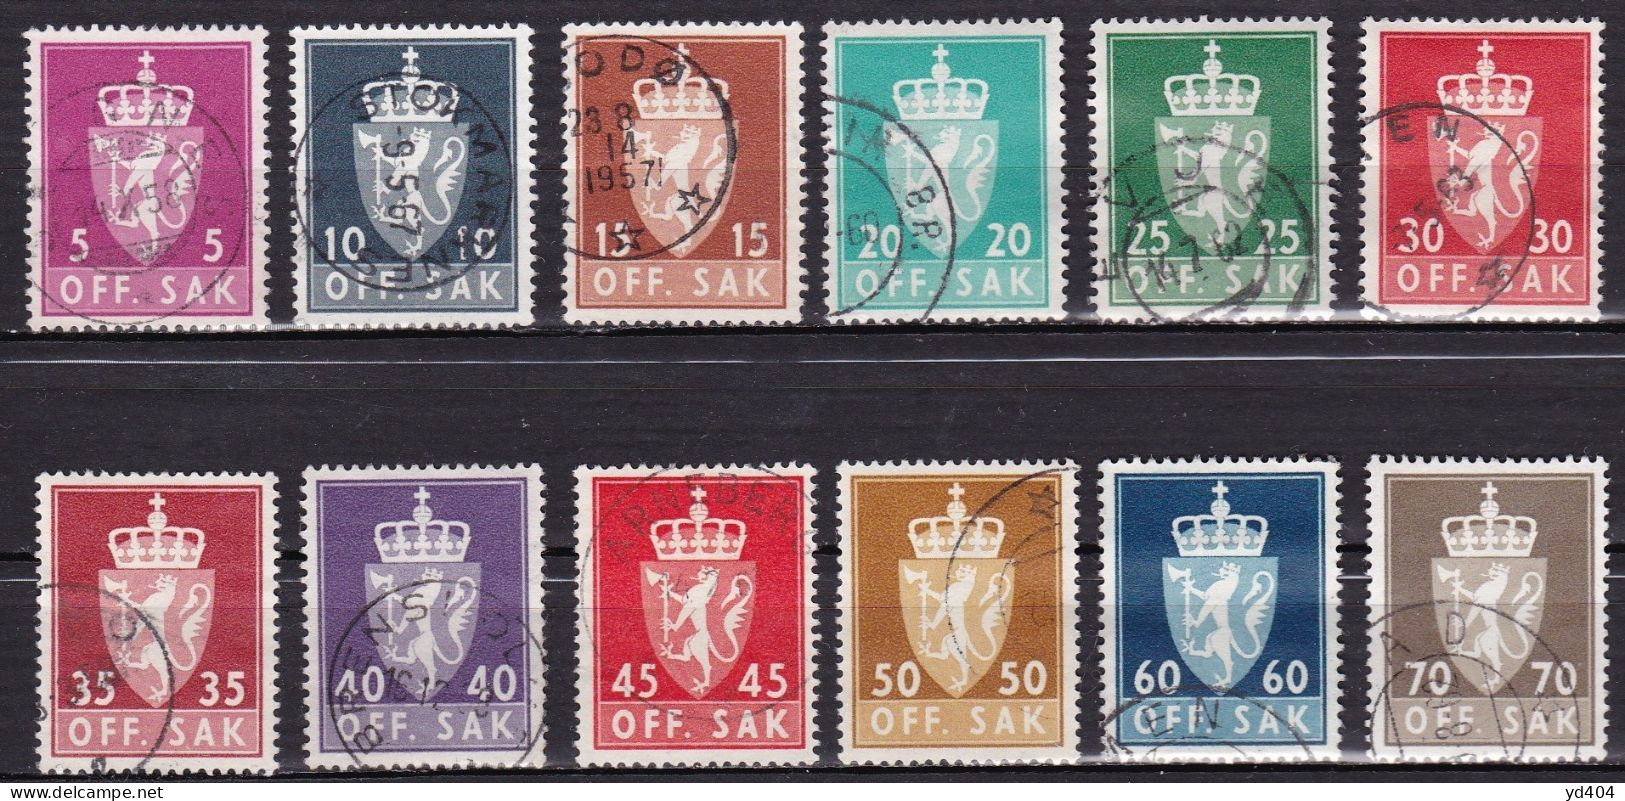 NO607 – NORVEGE - NORWAY - OFFICIAL FULL SETS - 1955-68 – MI # 68x/90x USED 26,70 € - Service